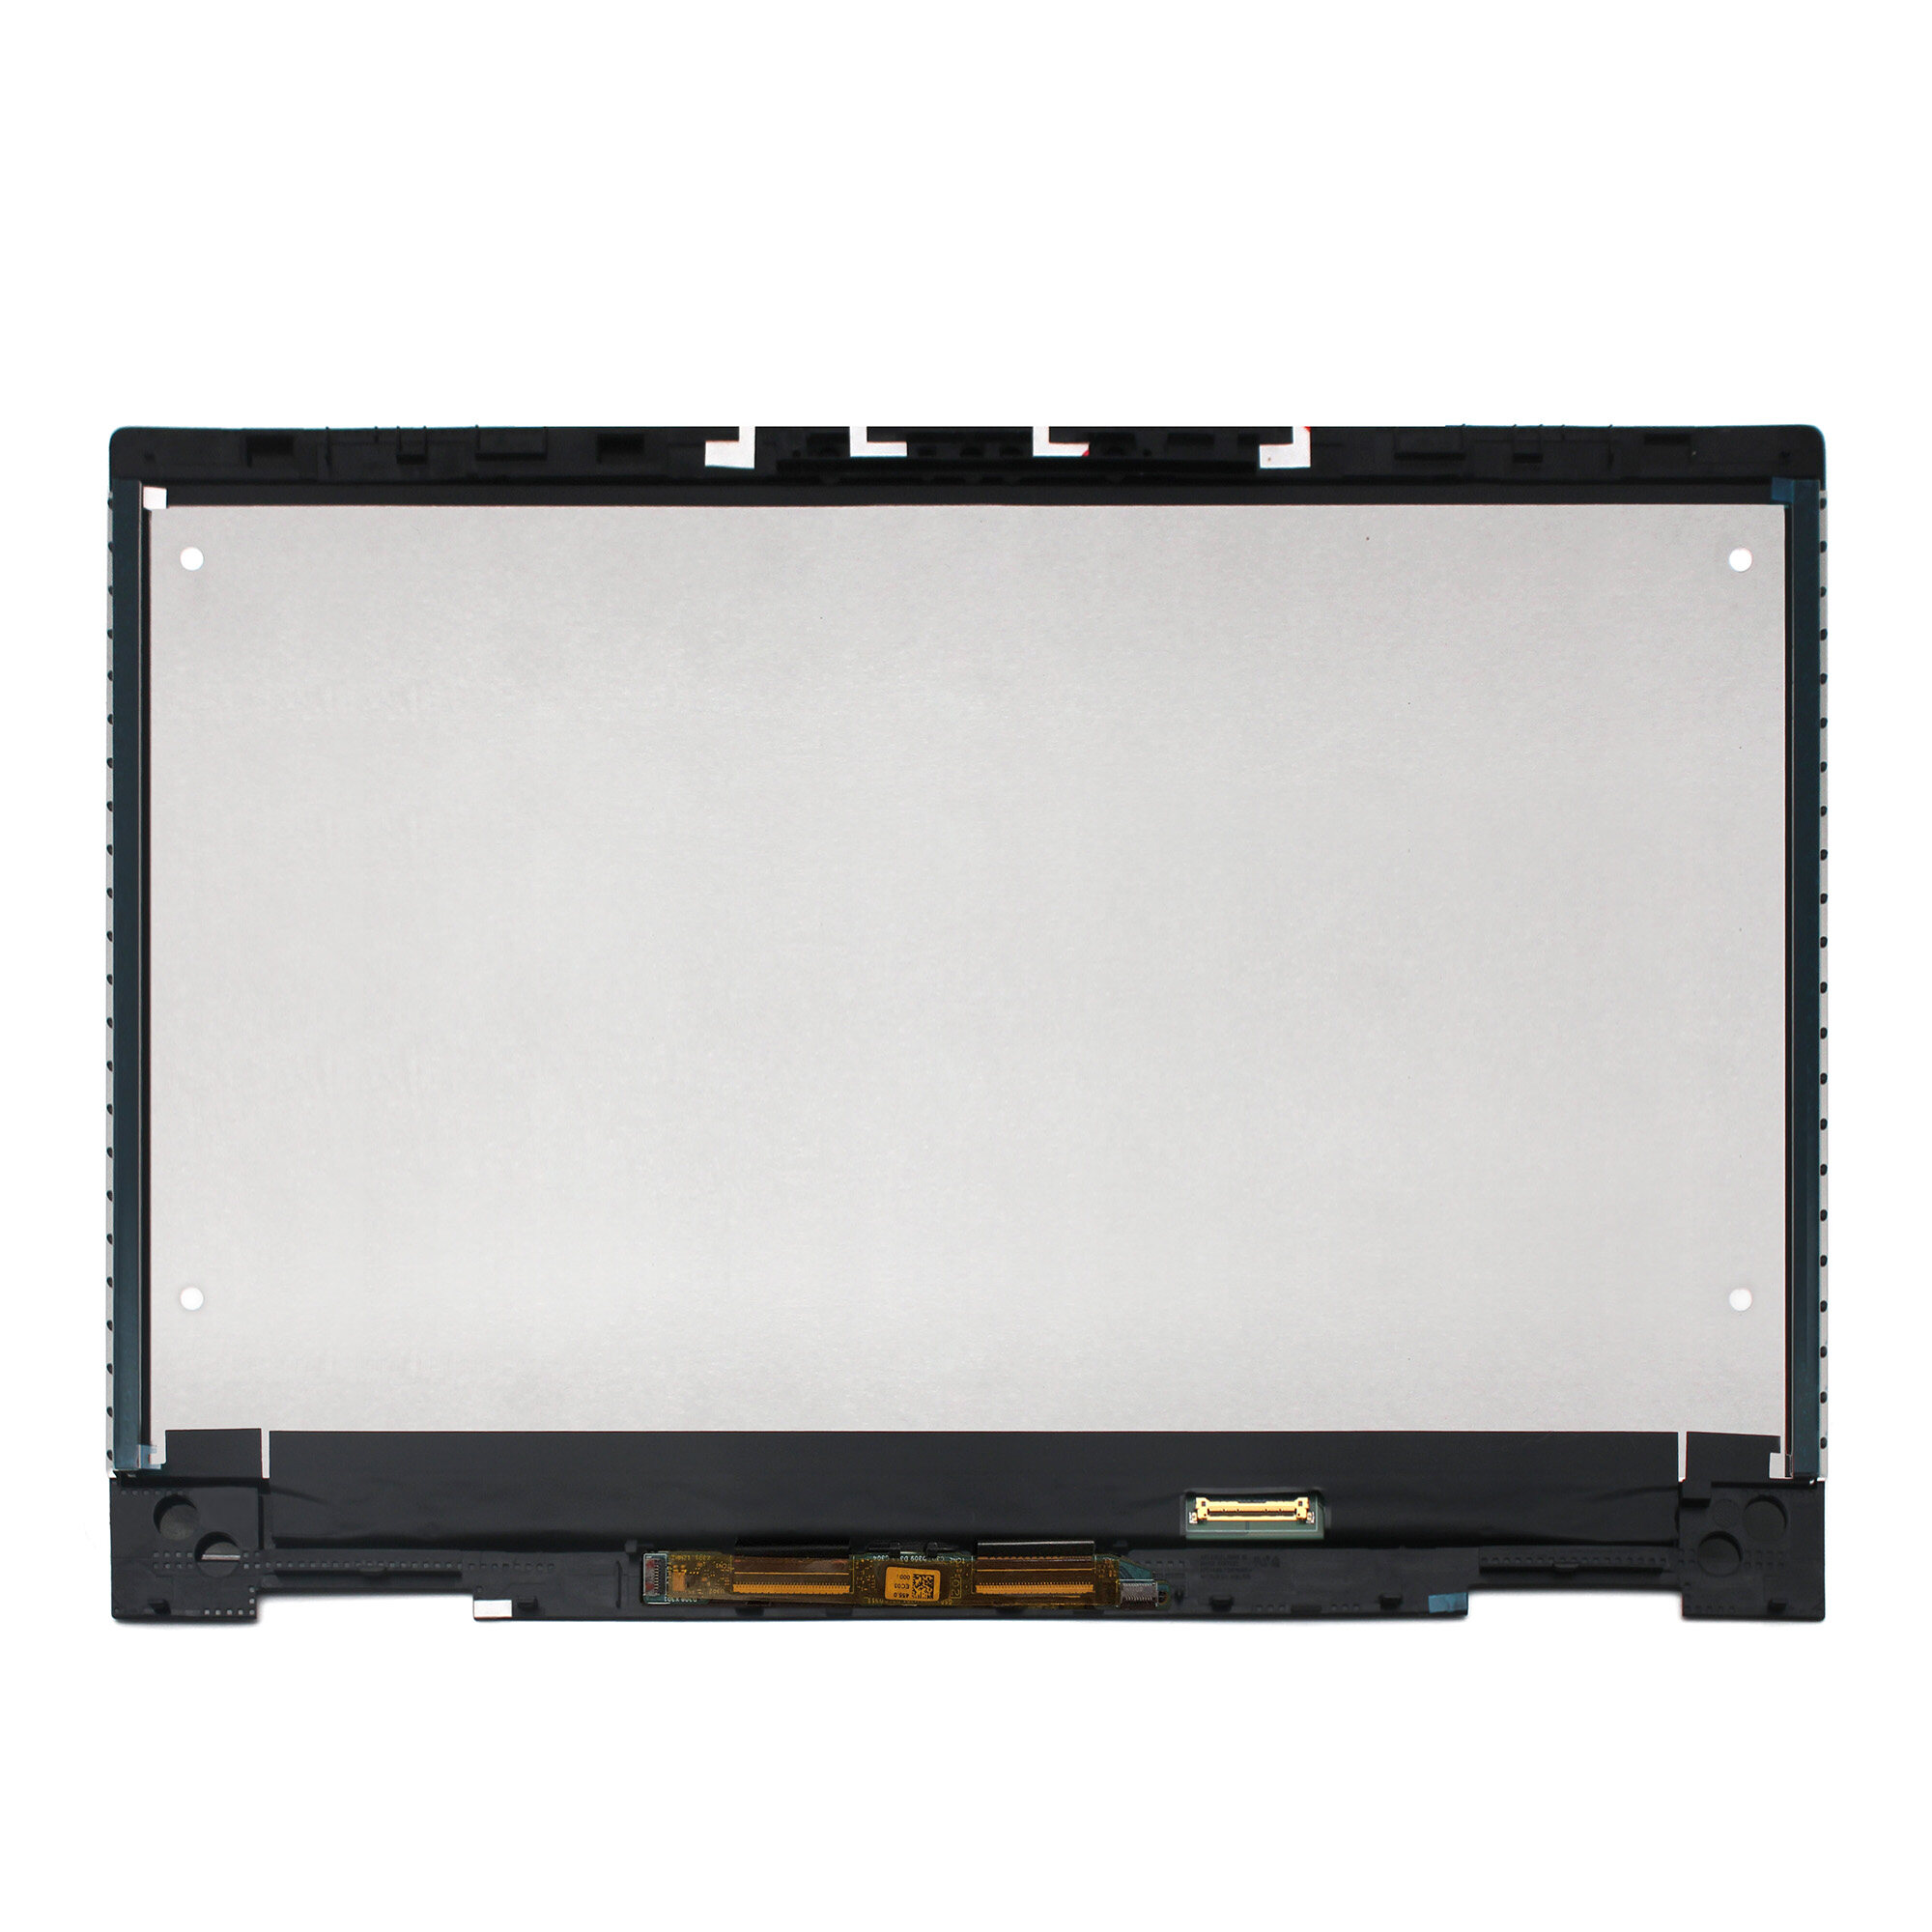 Kreplacement FHD LED LCD Touch Screen Digitizer Replacement With Bezel For HP ENVY x360 13-ag0003nf 13-ag0003ng 13-ag0003sa